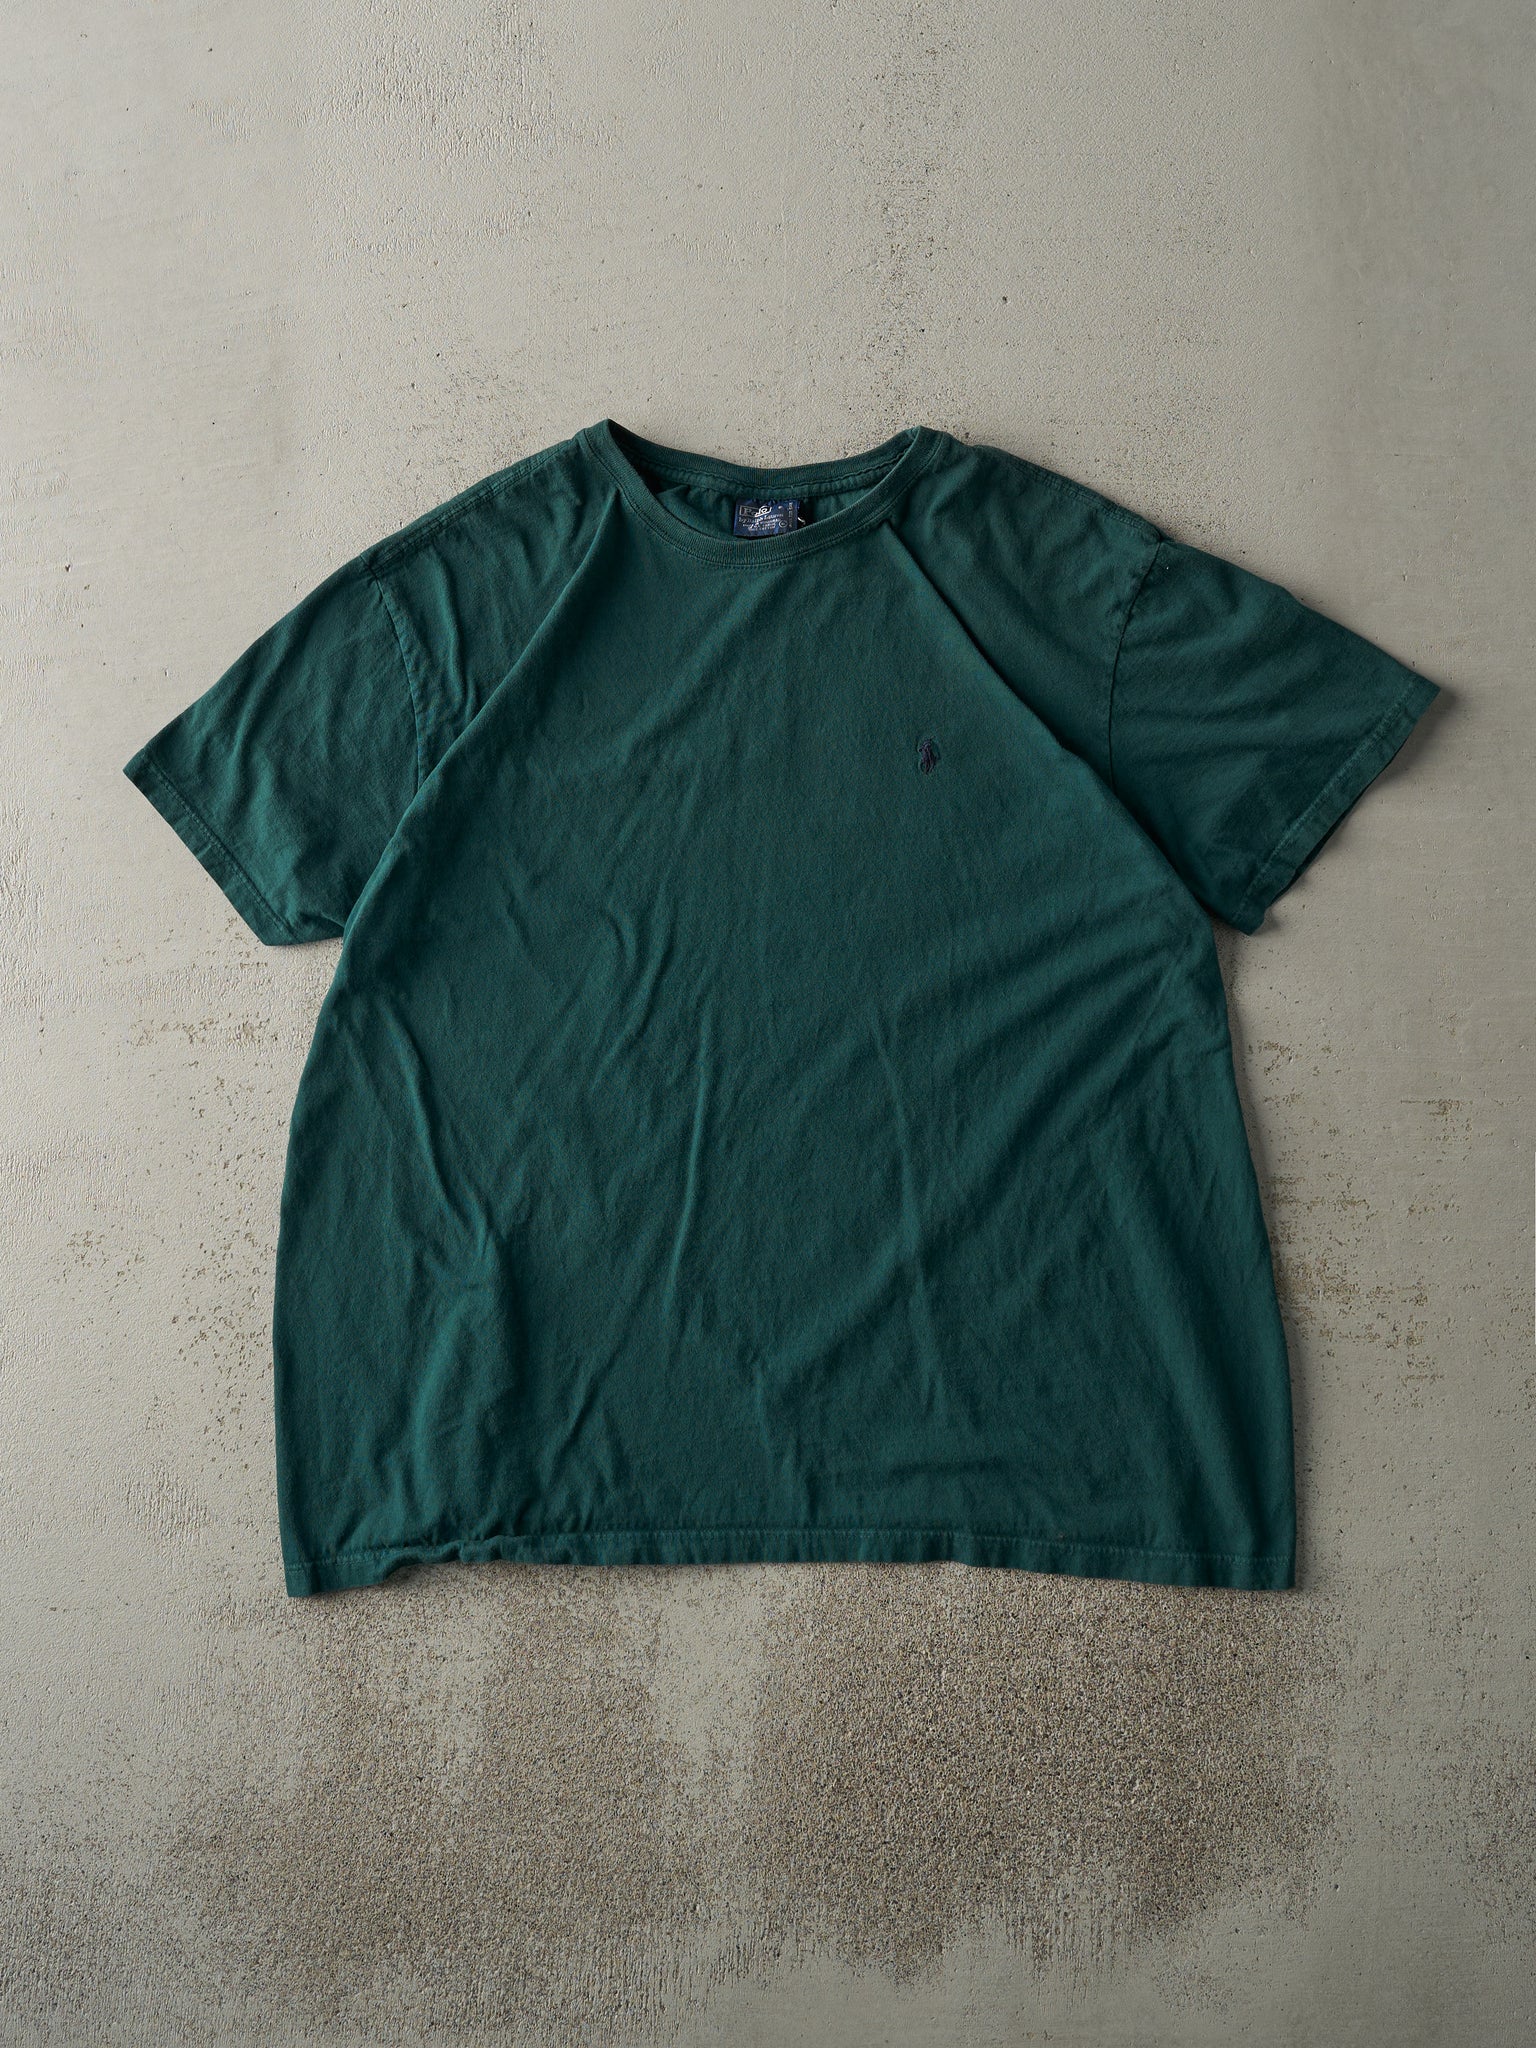 Vintage 90s Forest Green Embroidered Polo Tee (L)